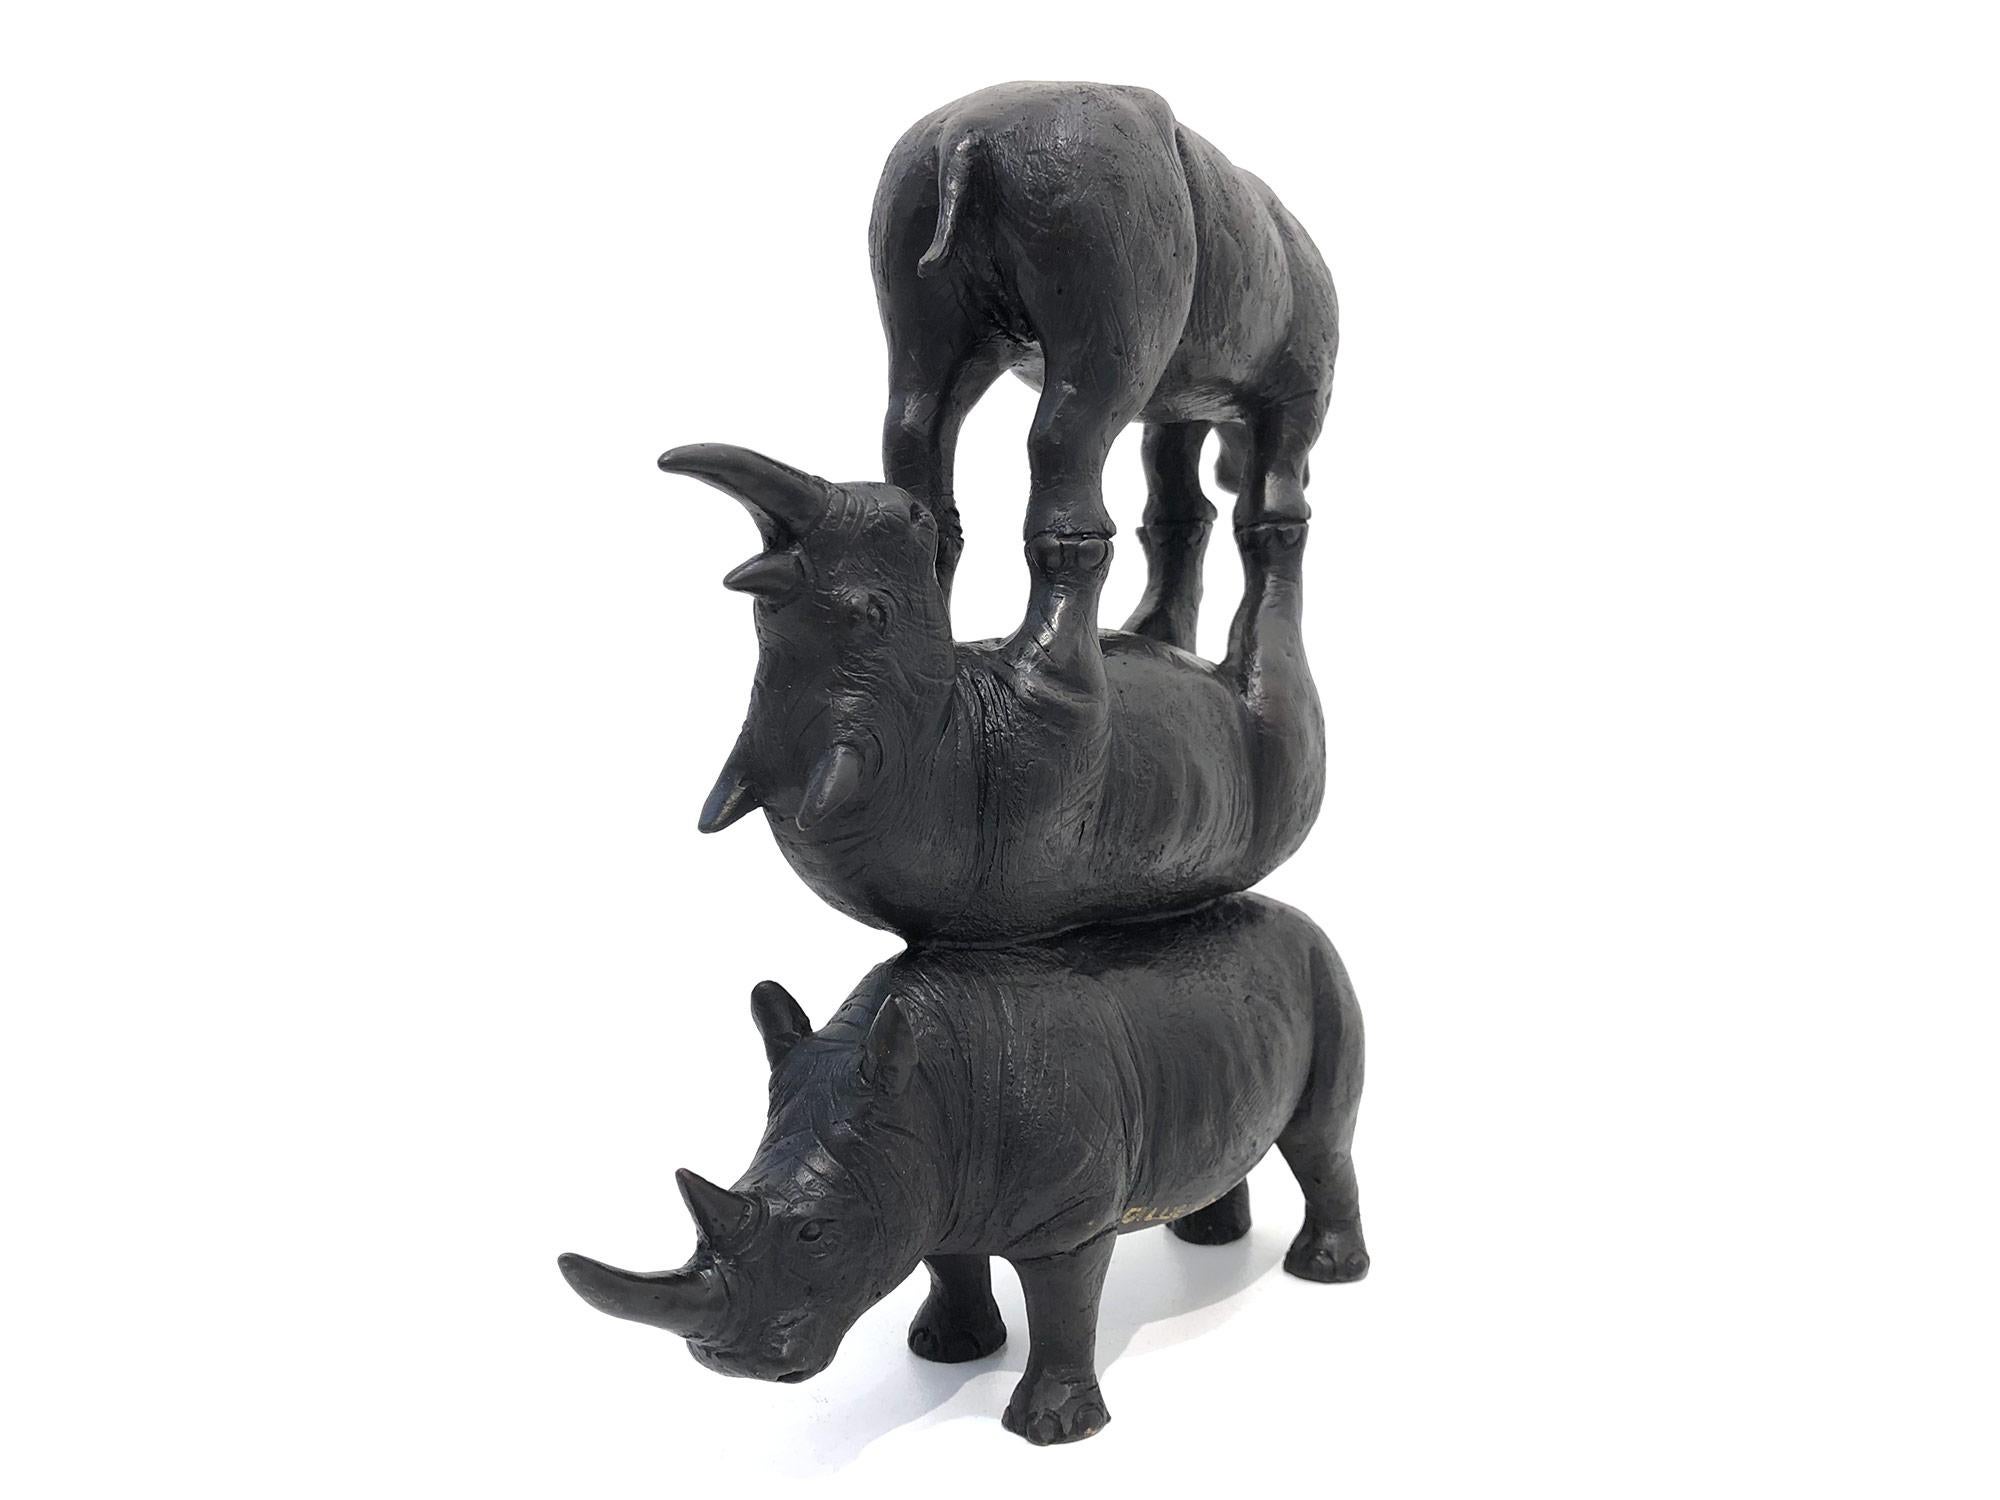 A whimsical yet very strong piece depicting The Last Three Northern White Rhinos on earth. This incredible sculpture comes with a powerful message. It was inspired by Gillie and Marc’s trip to Kenya to visit the last three northern white rhinos on